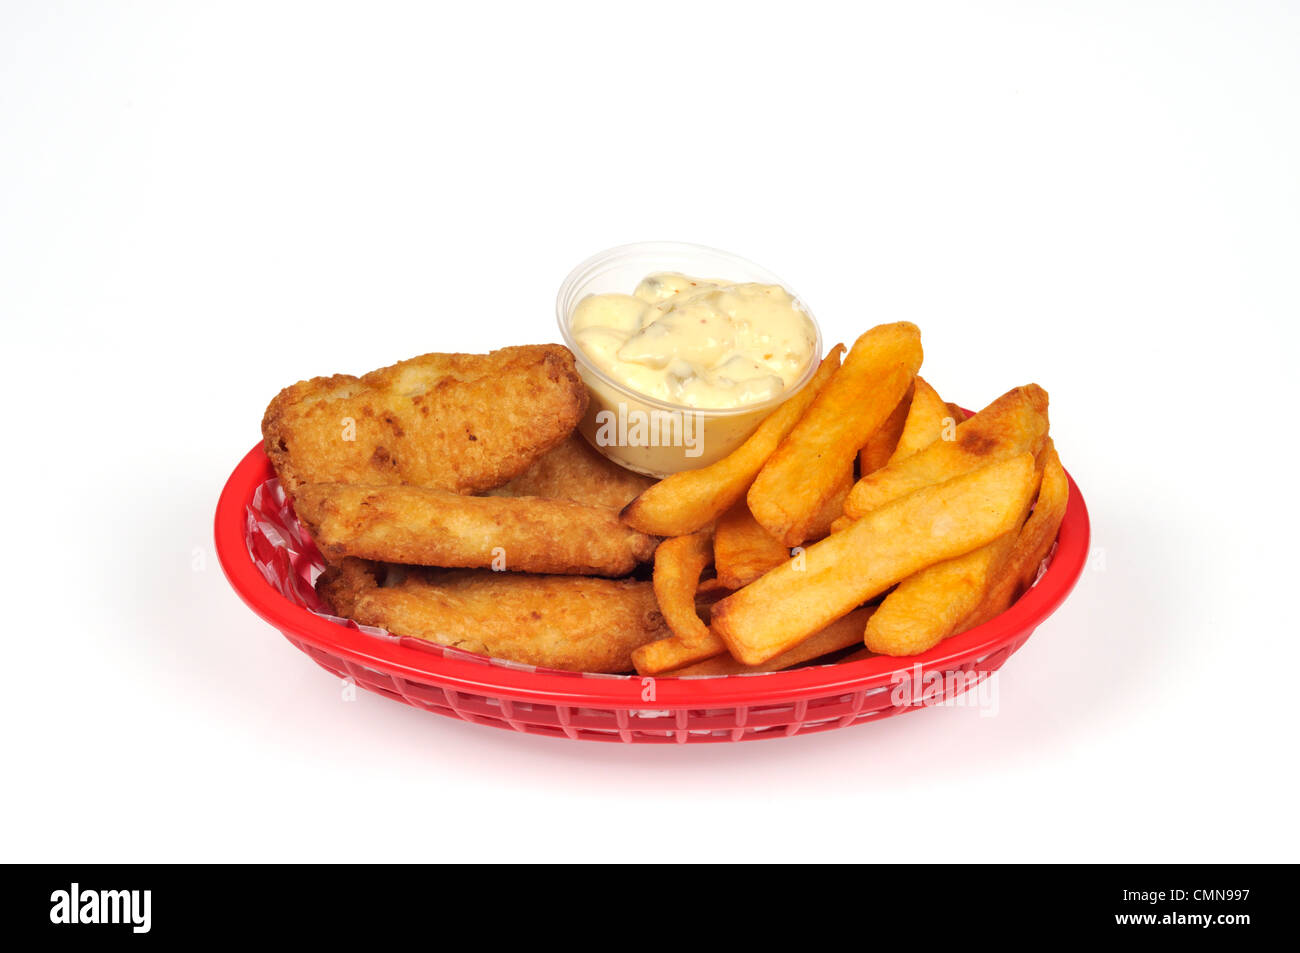 Basket of fish and chips with tartar sauce Stock Photo